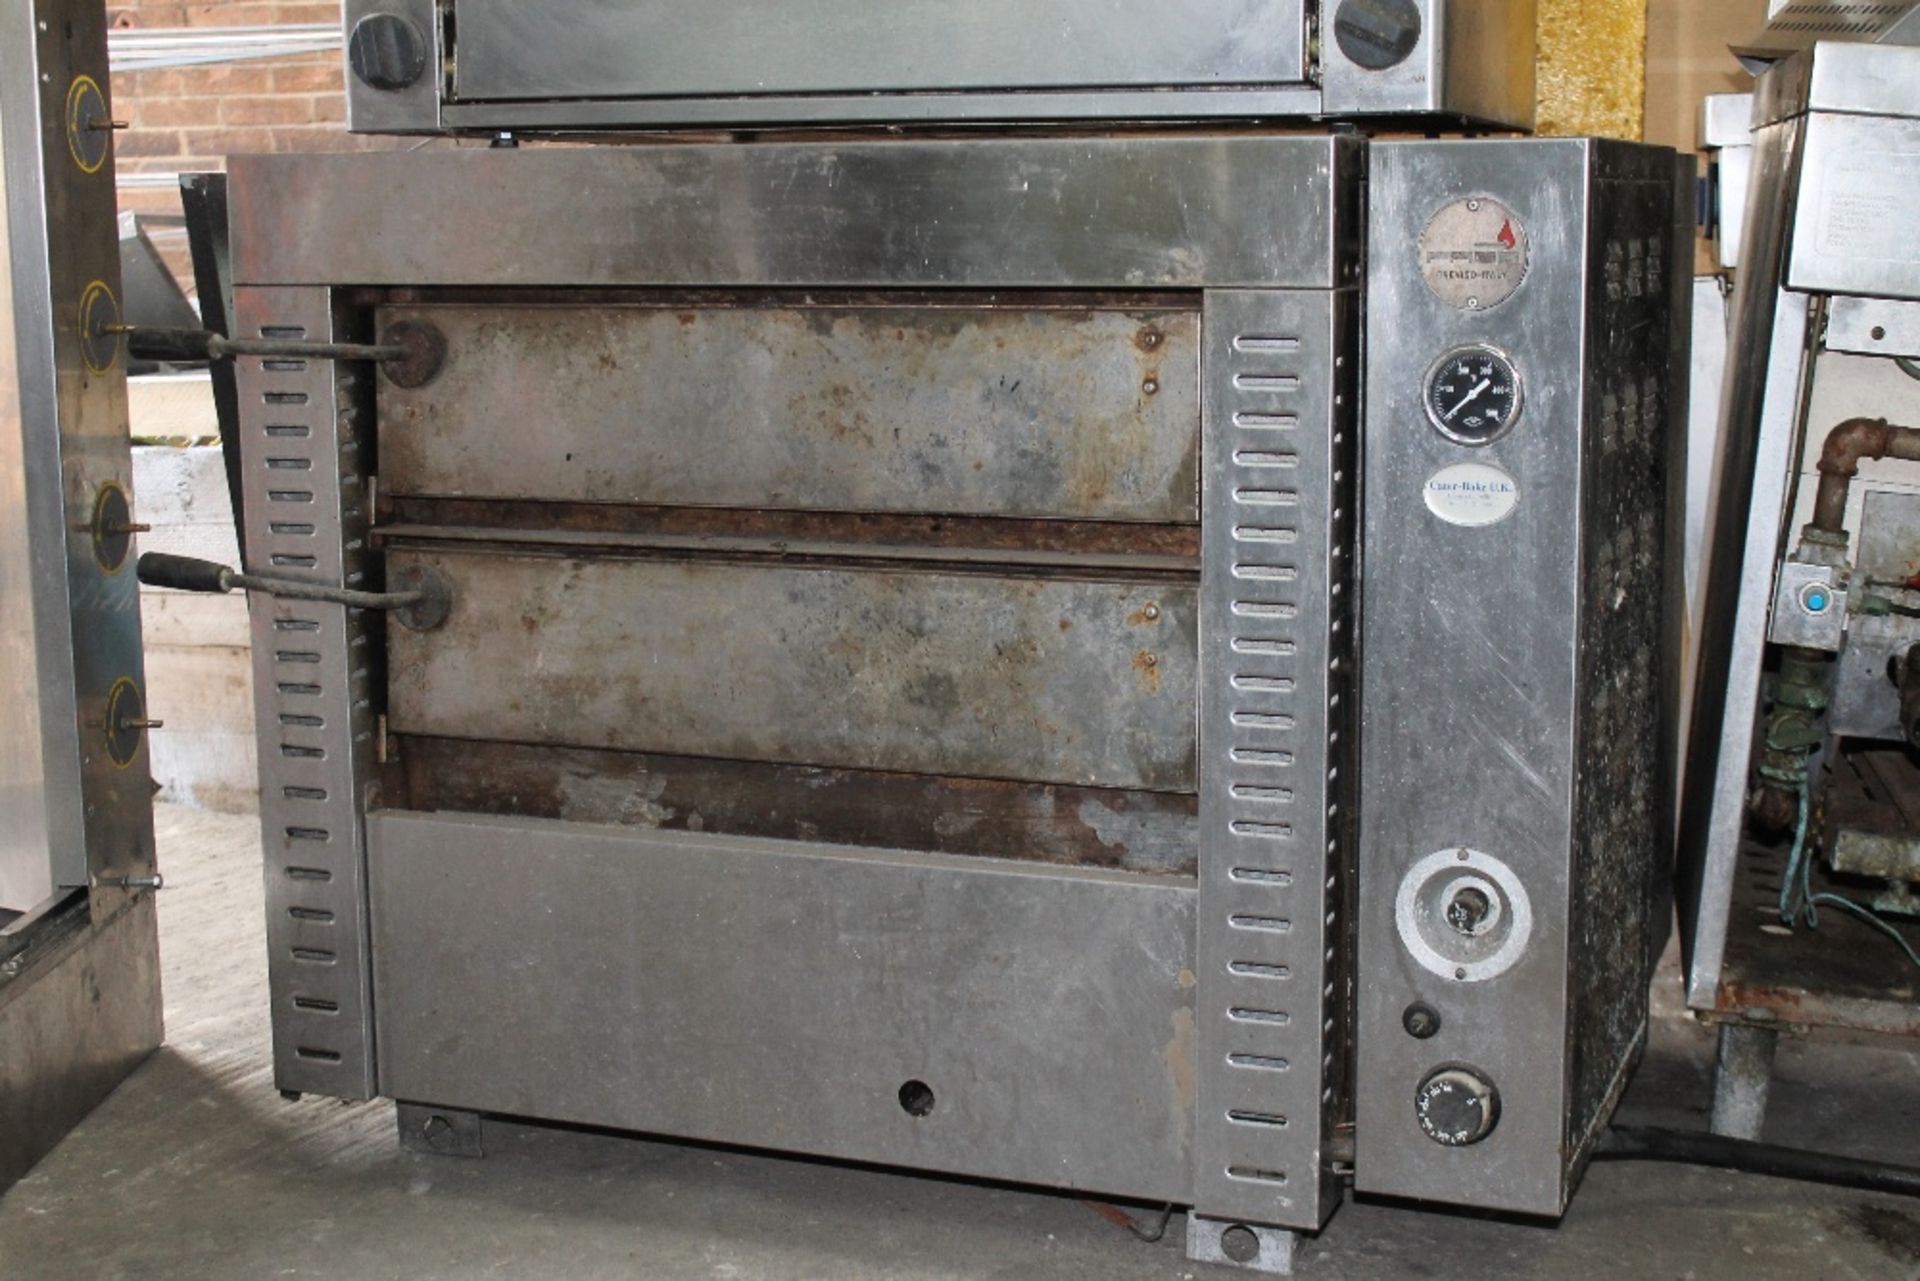 Caterbake UK Double Deck Gas Pizza Oven – Needs tidying up